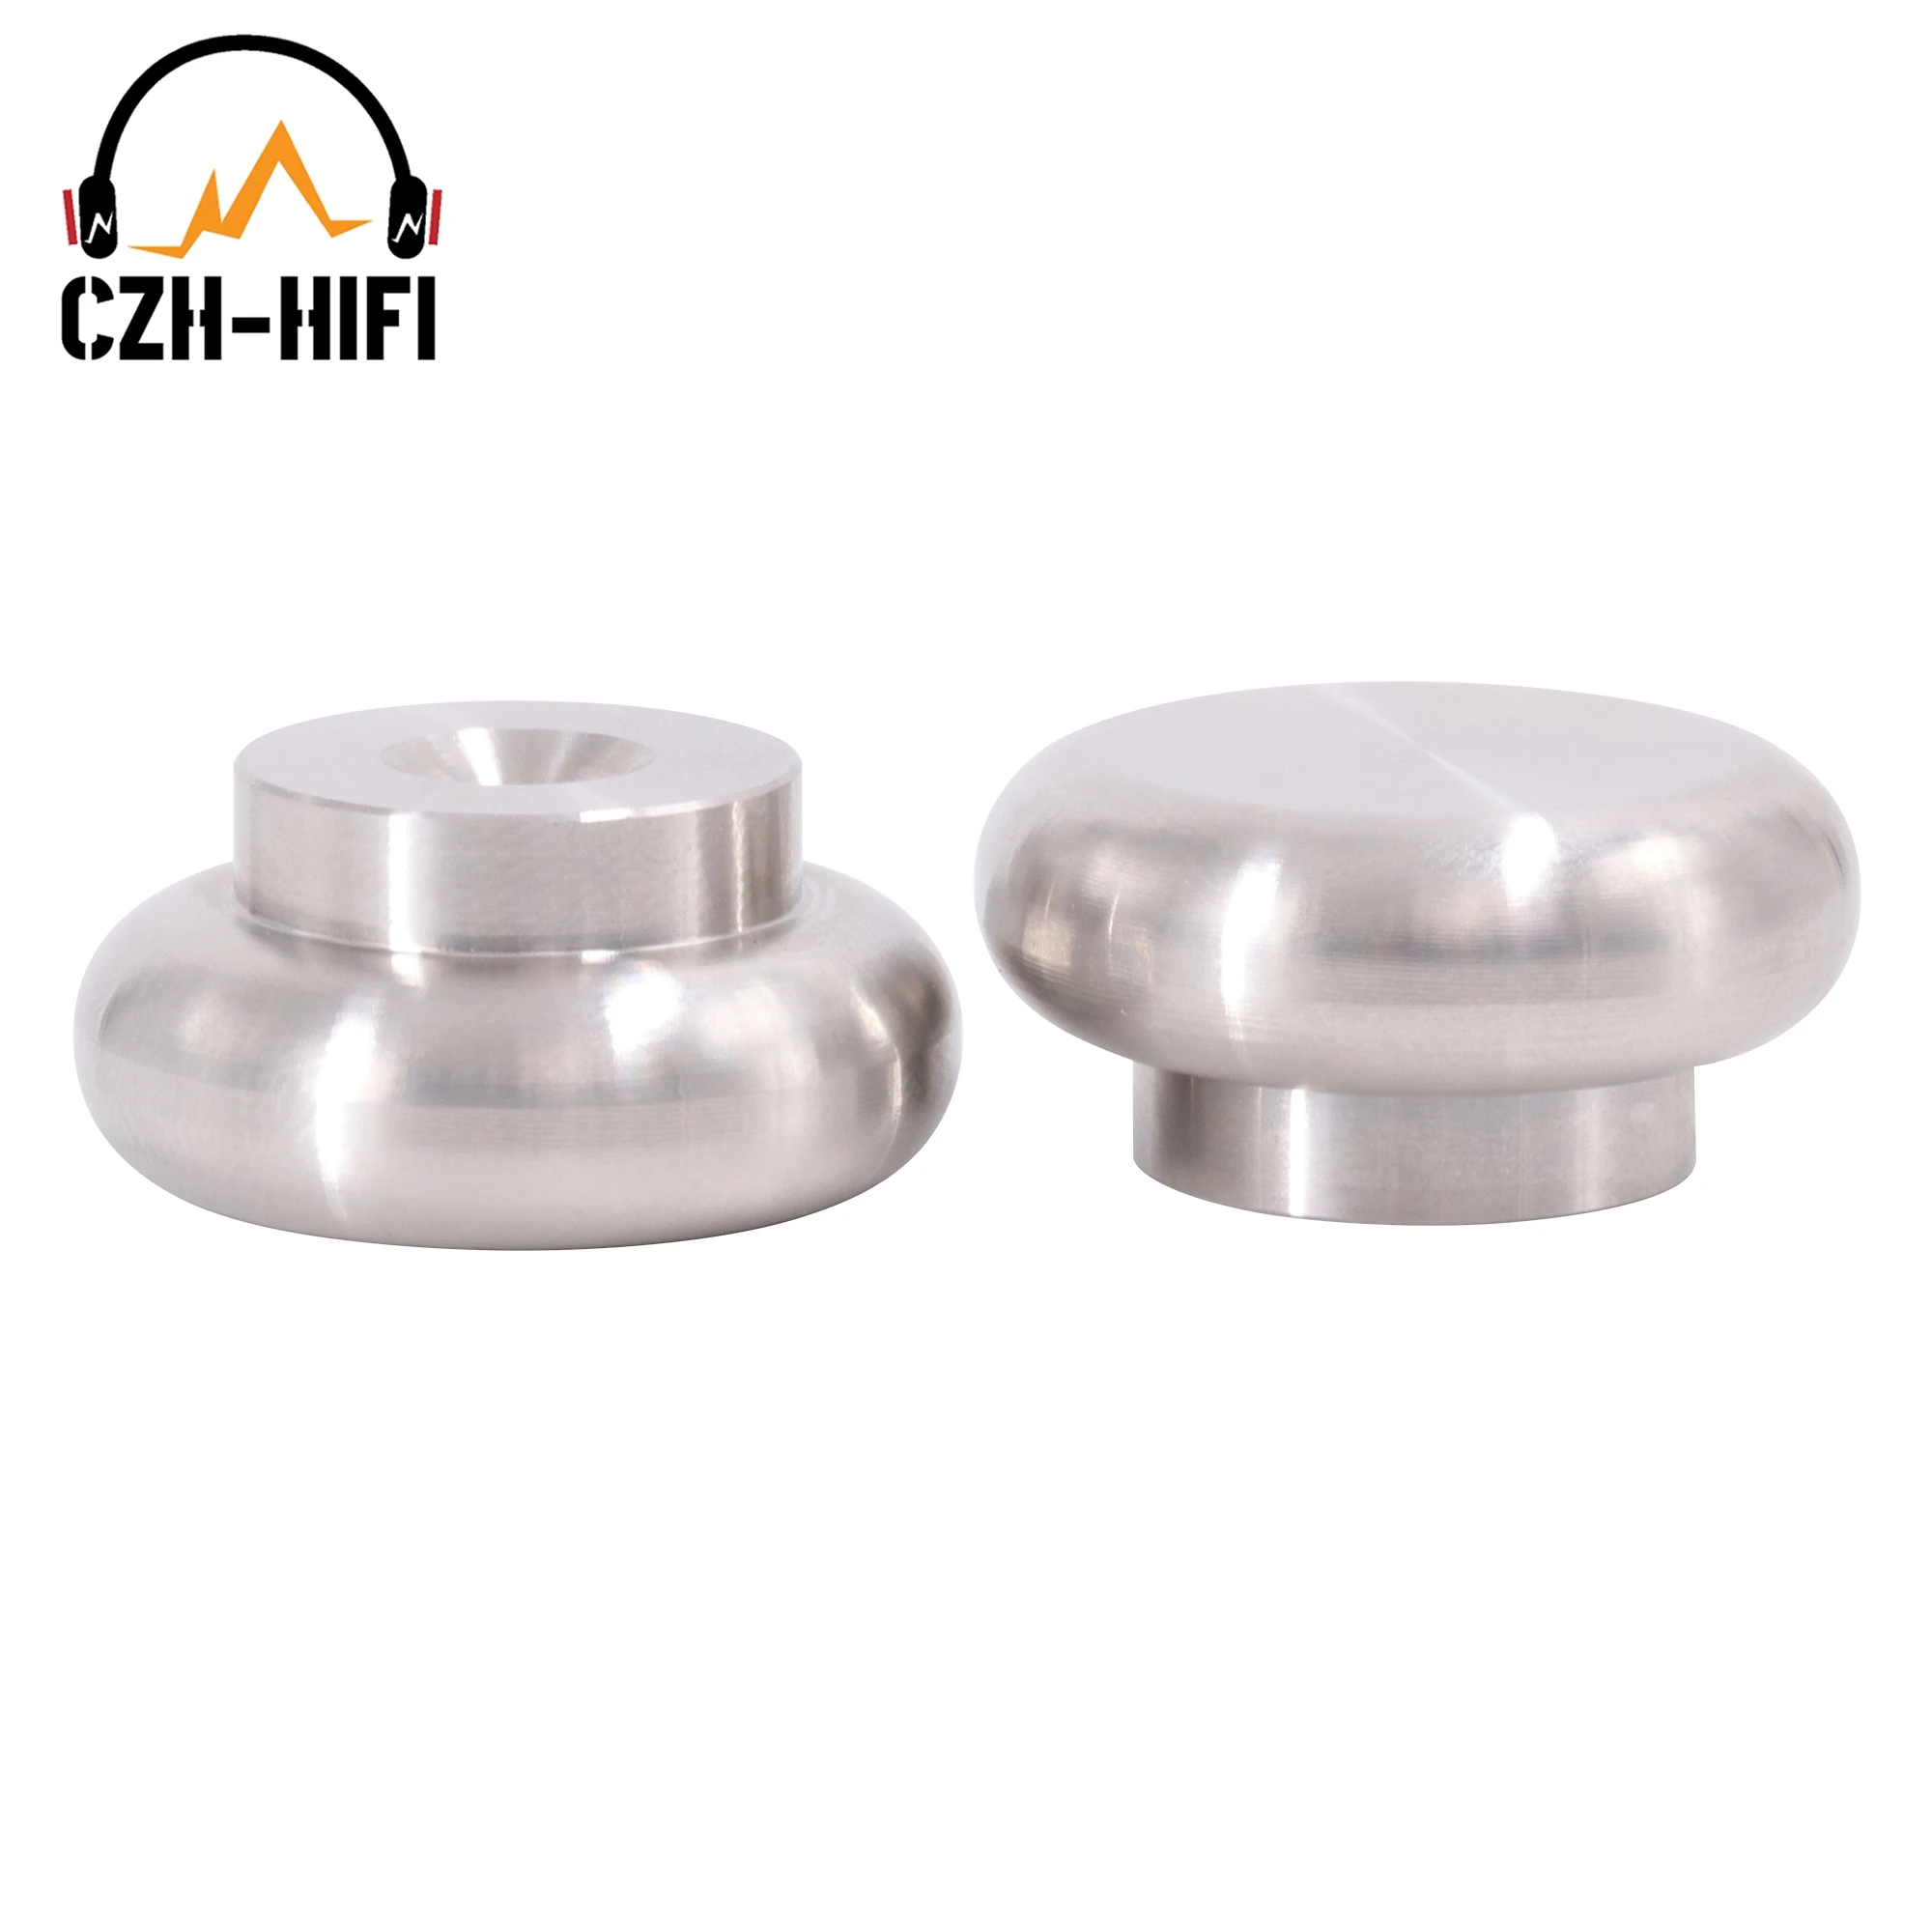 

1PC Audio Isolation Feet Pad Stand Base Cone Mat 316L Stainless Steel 25x12mm Amplifier Speaker DAC Radio Turntable Base Pad